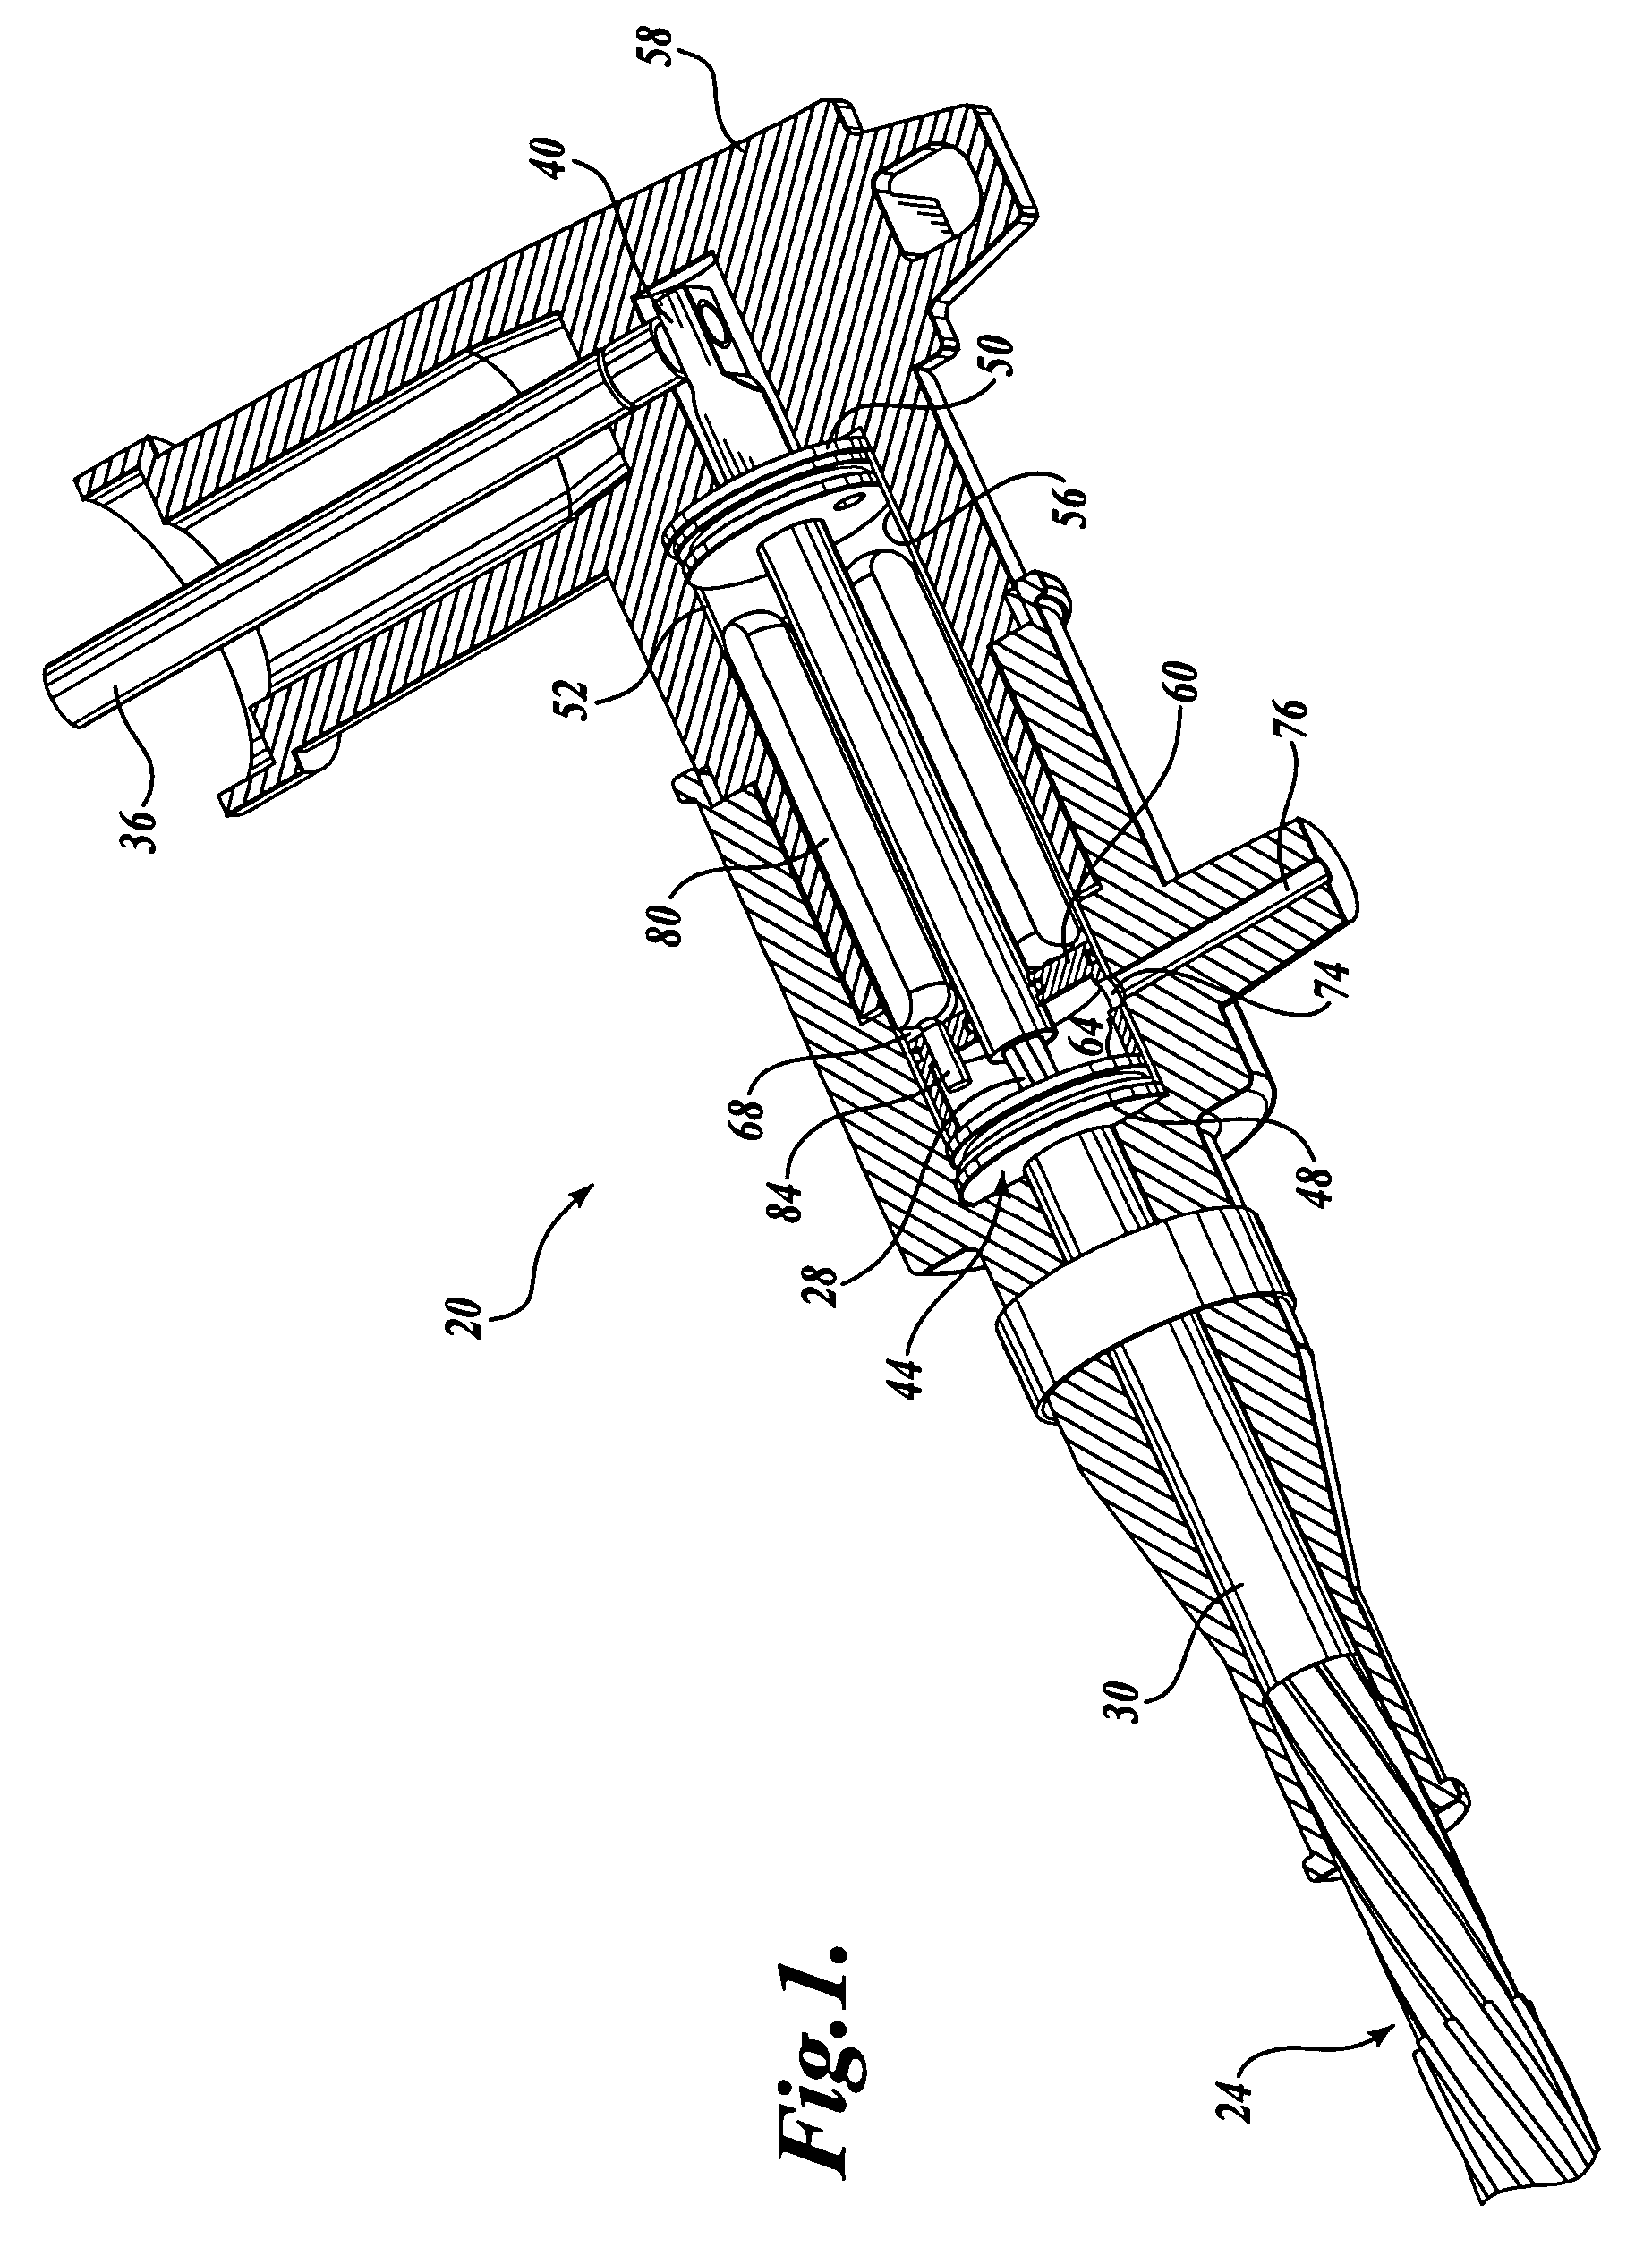 Cable connectors with internal fluid reservoirs